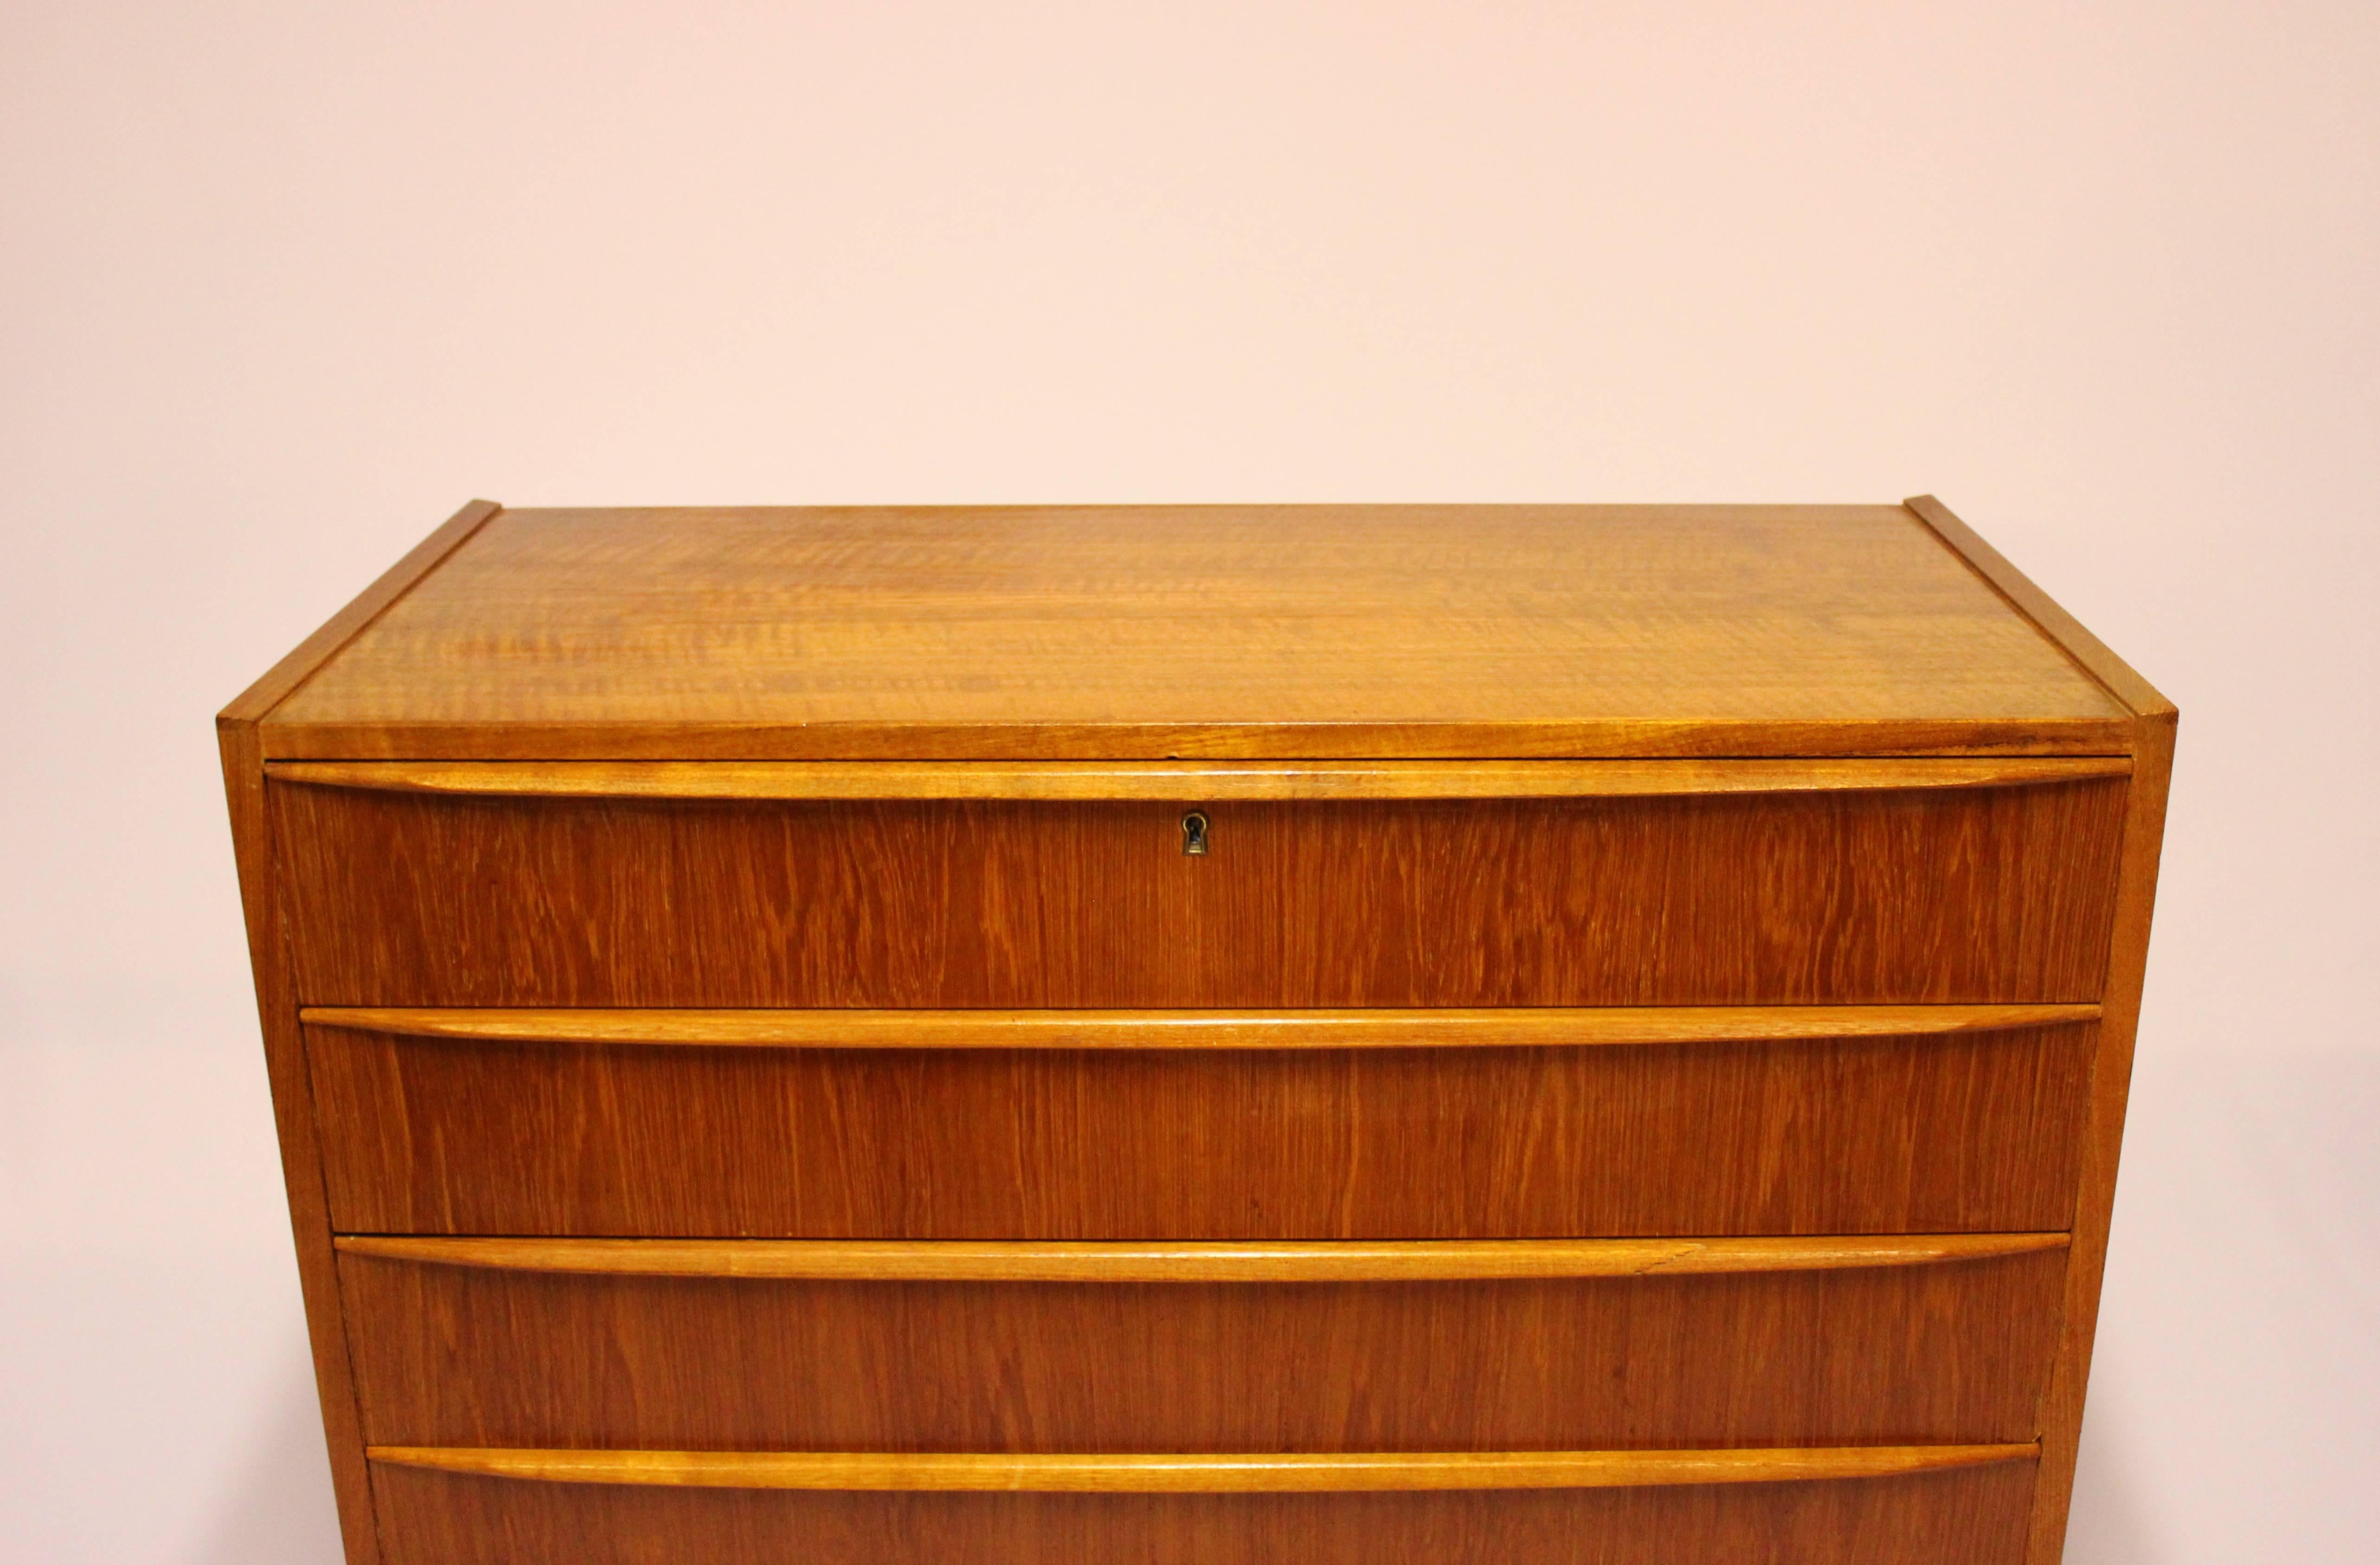 Chest with six drawers in teak of Danish design manufactured by Kibæk Furniture Factory in the 1960s. The chest is in great vintage condition.